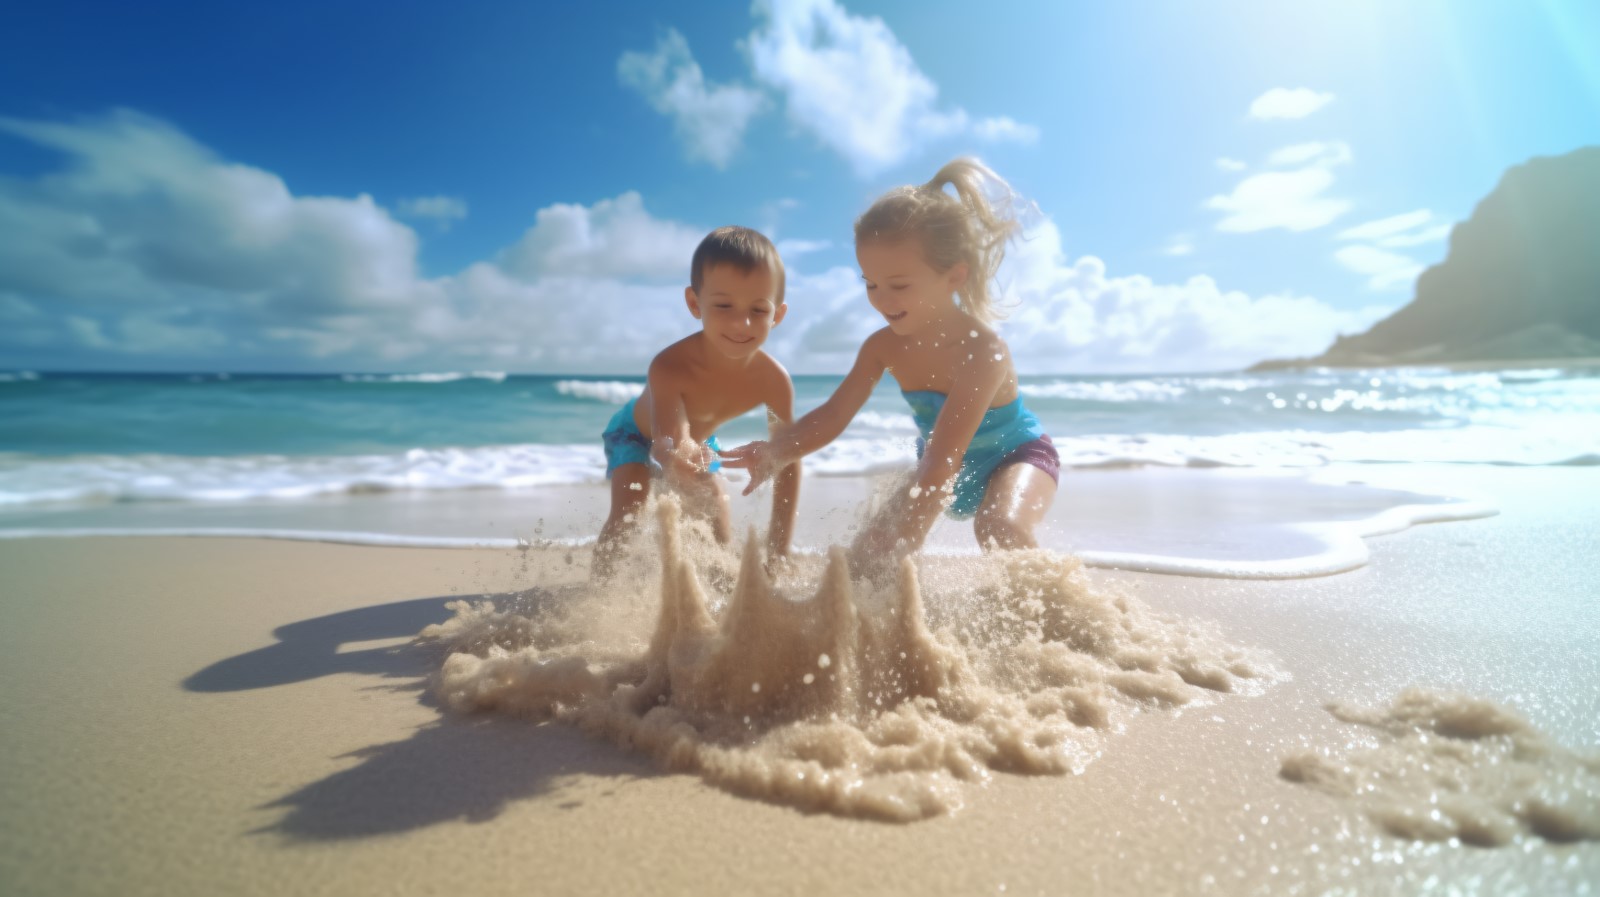 Kids playing with sand in beach scene 231